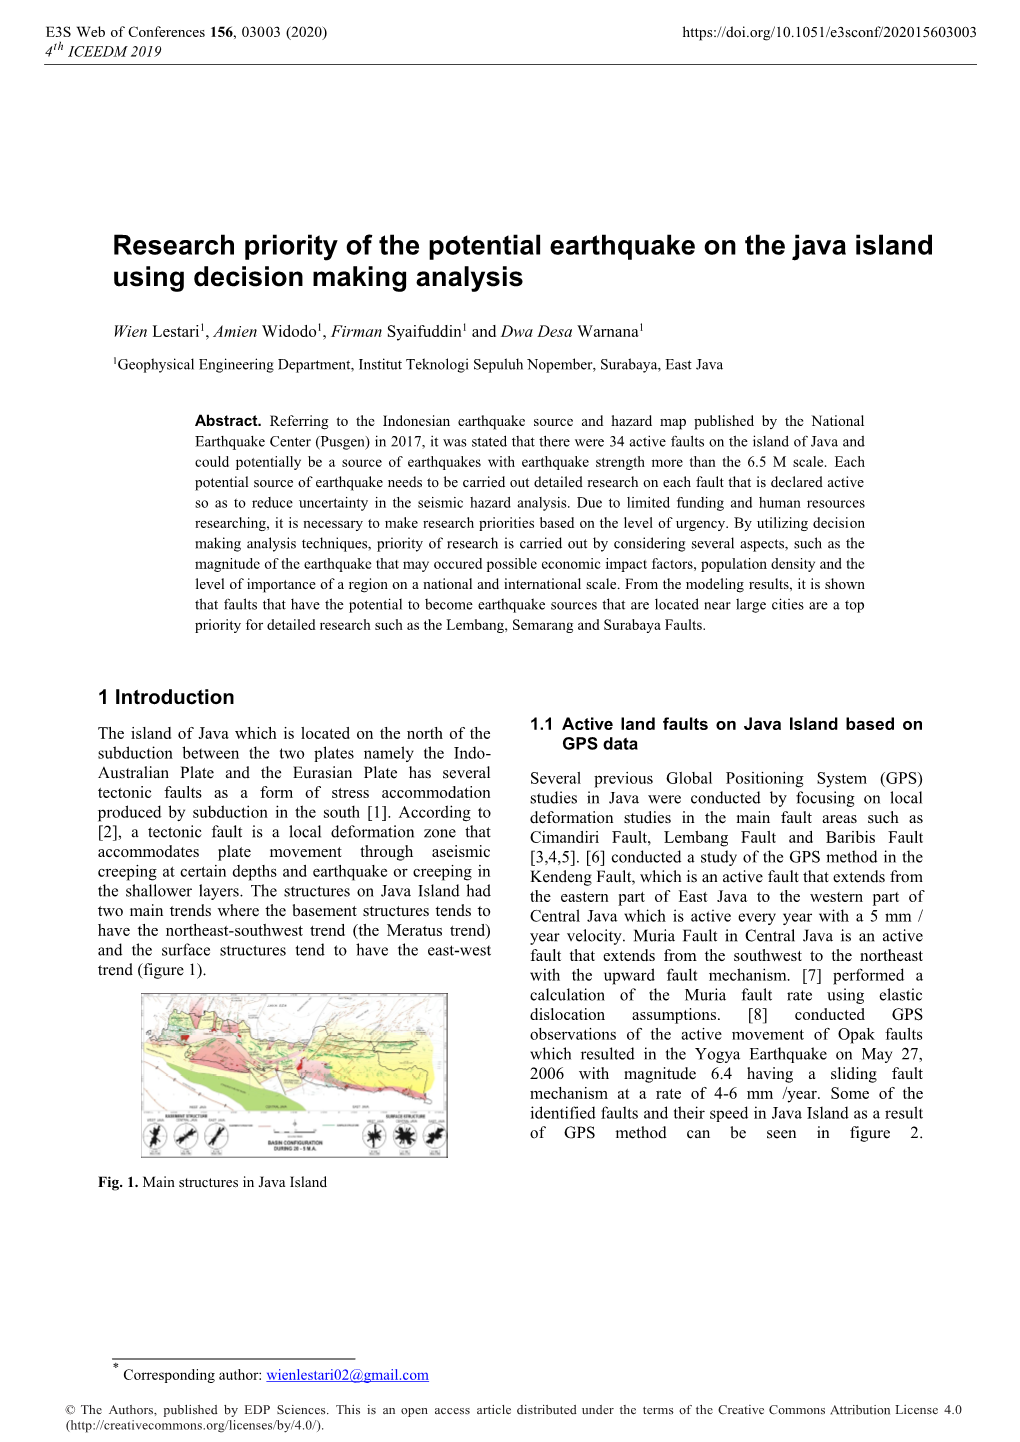 Research Priority of the Potential Earthquake on the Java Island Using Decision Making Analysis